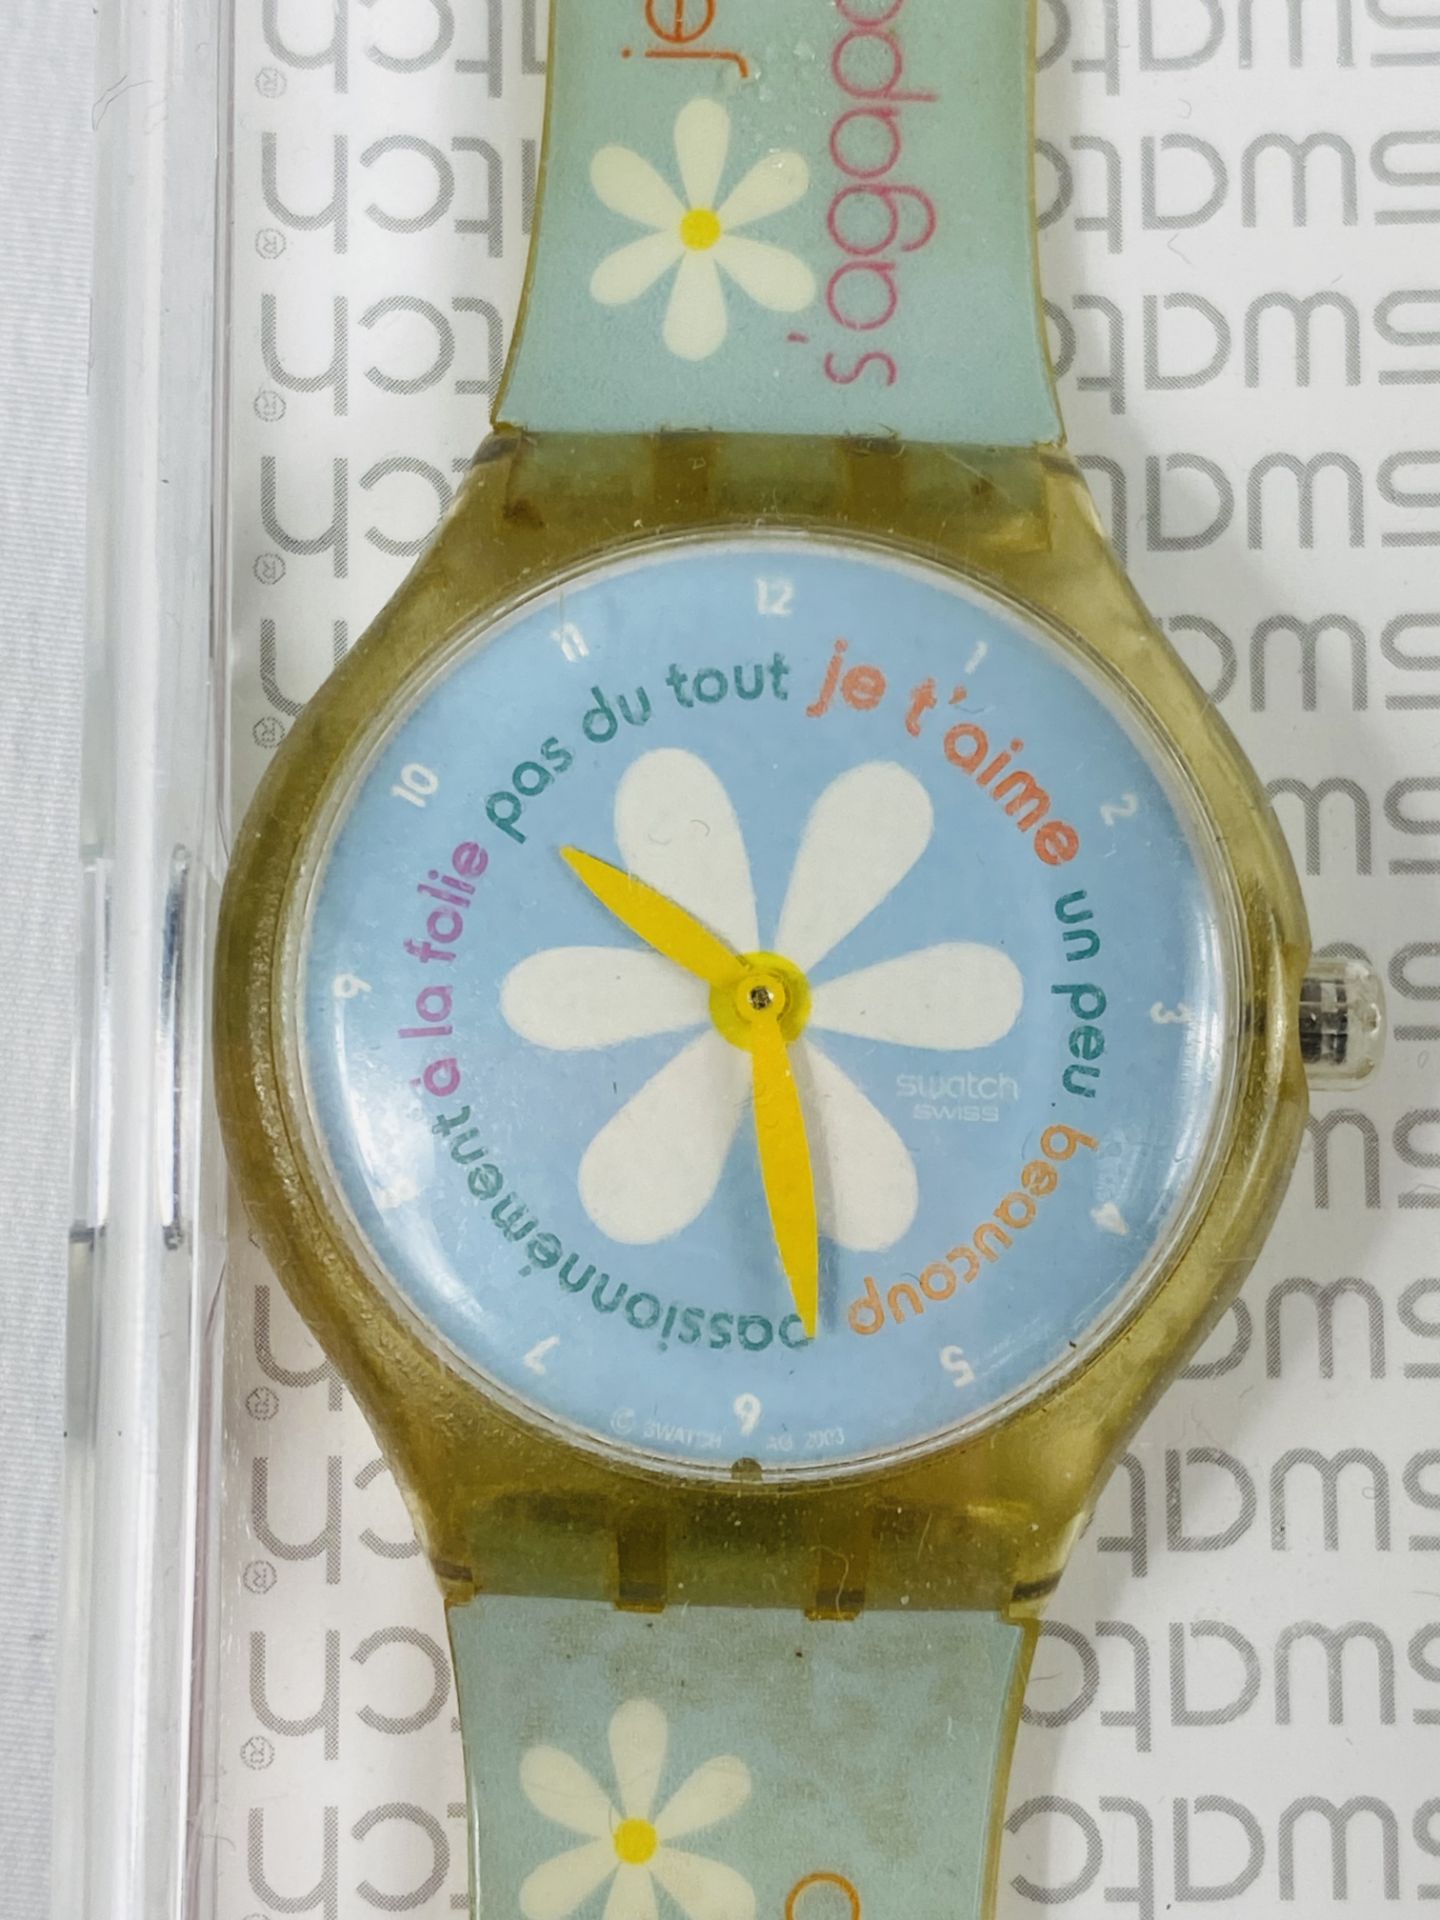 Eleven Swatch watches - Image 9 of 12